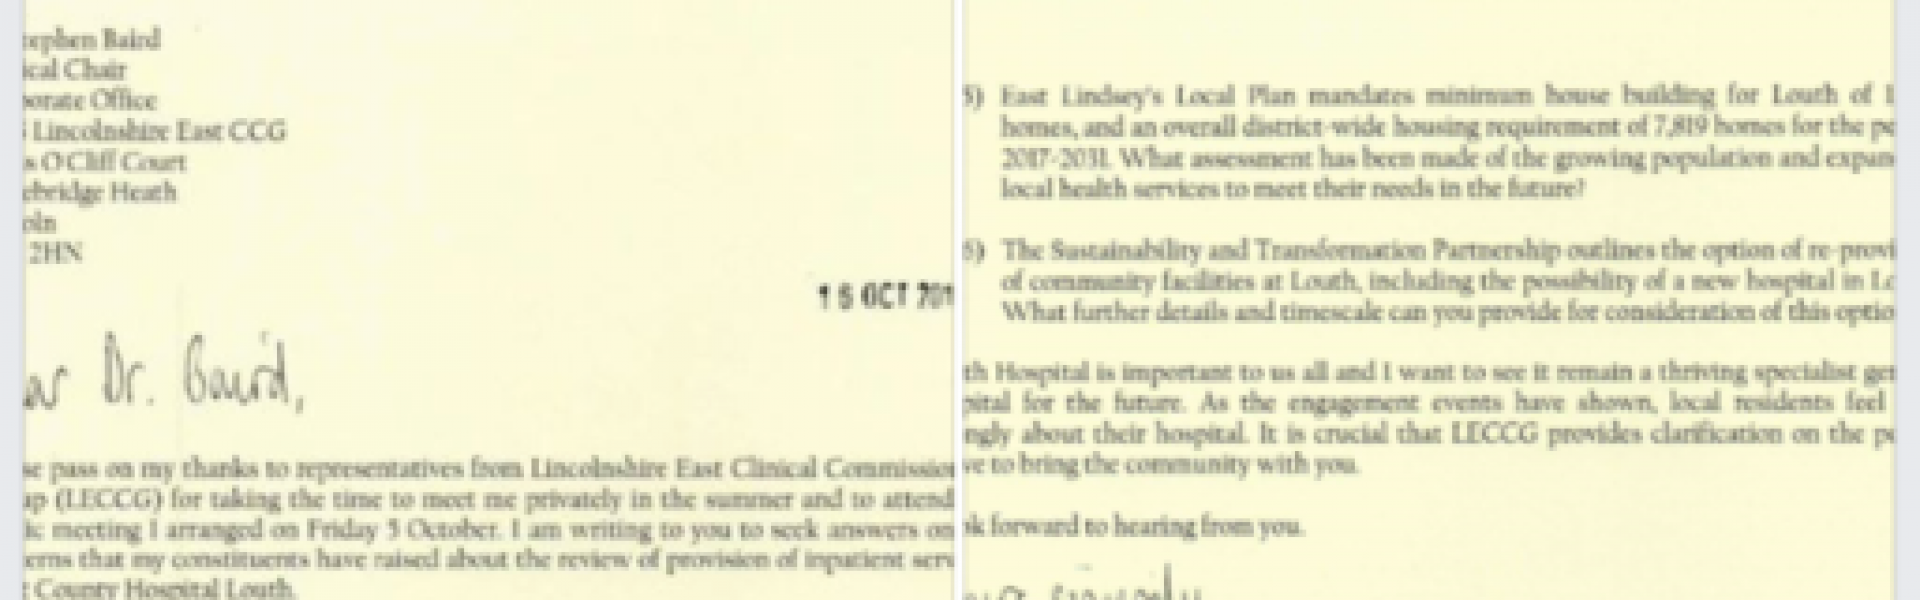 Letter to CCG